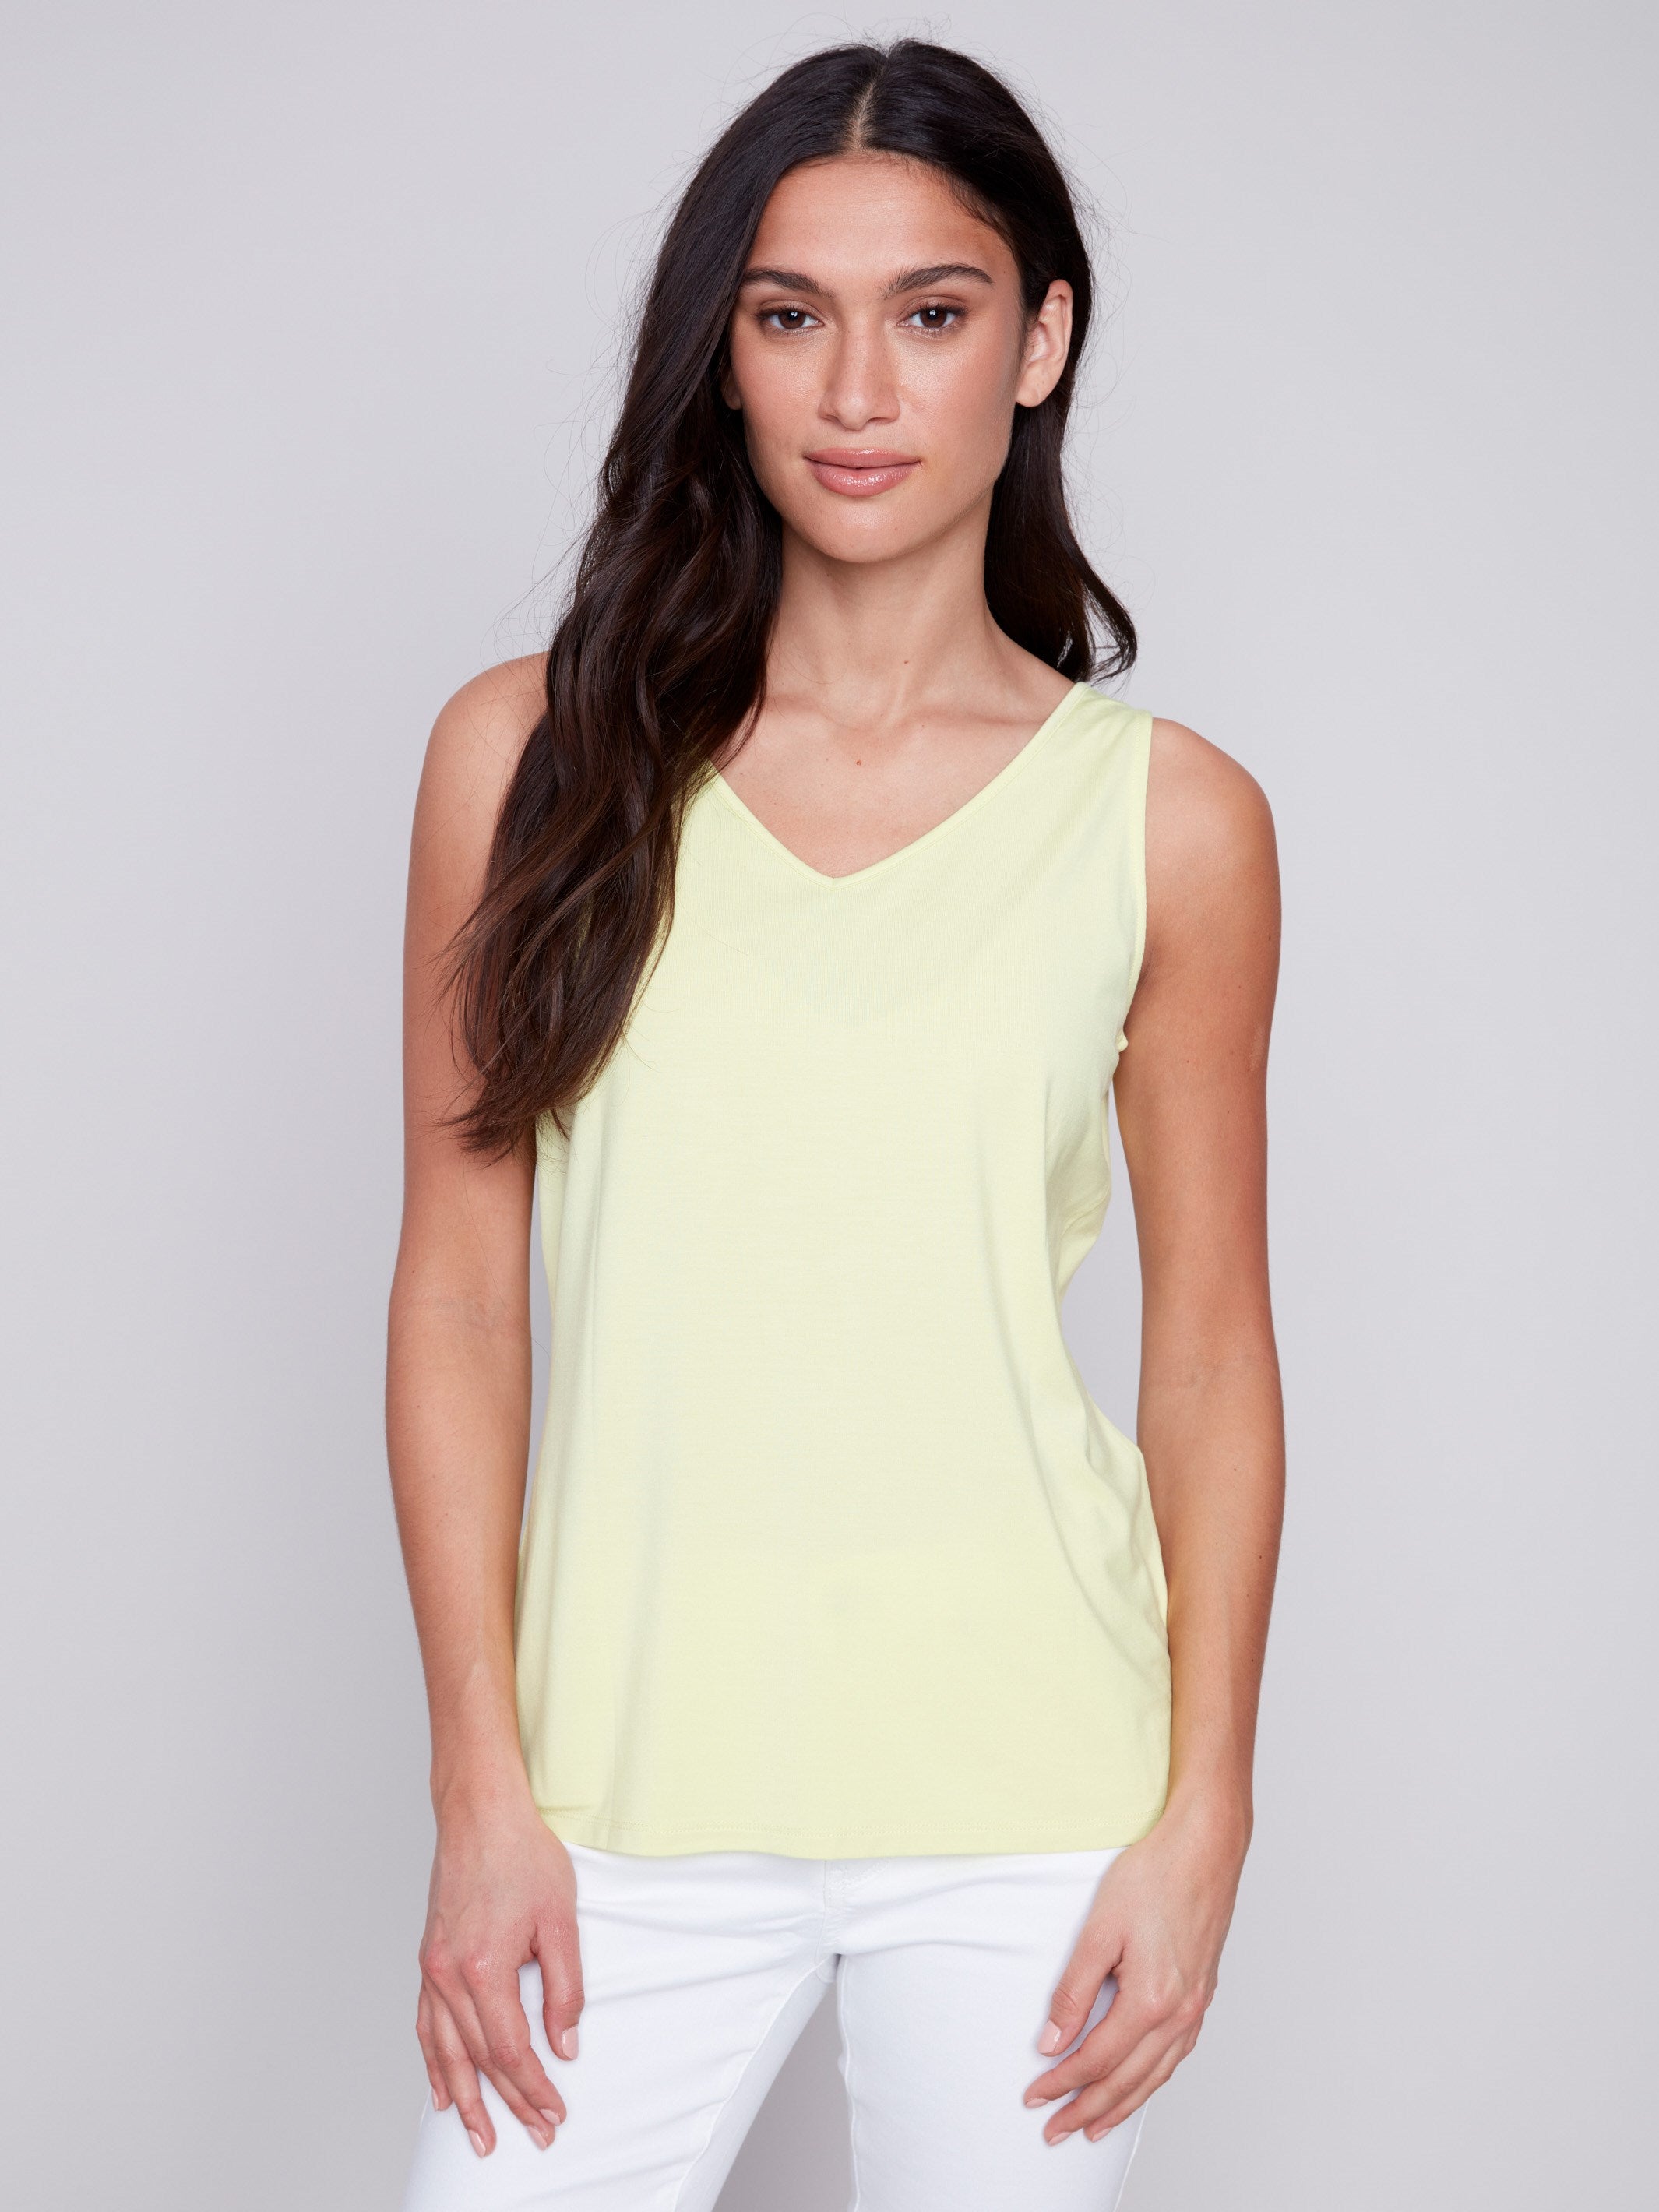 Reversible Bamboo Cami - Anise - Charlie B Collection Canada - Image 2